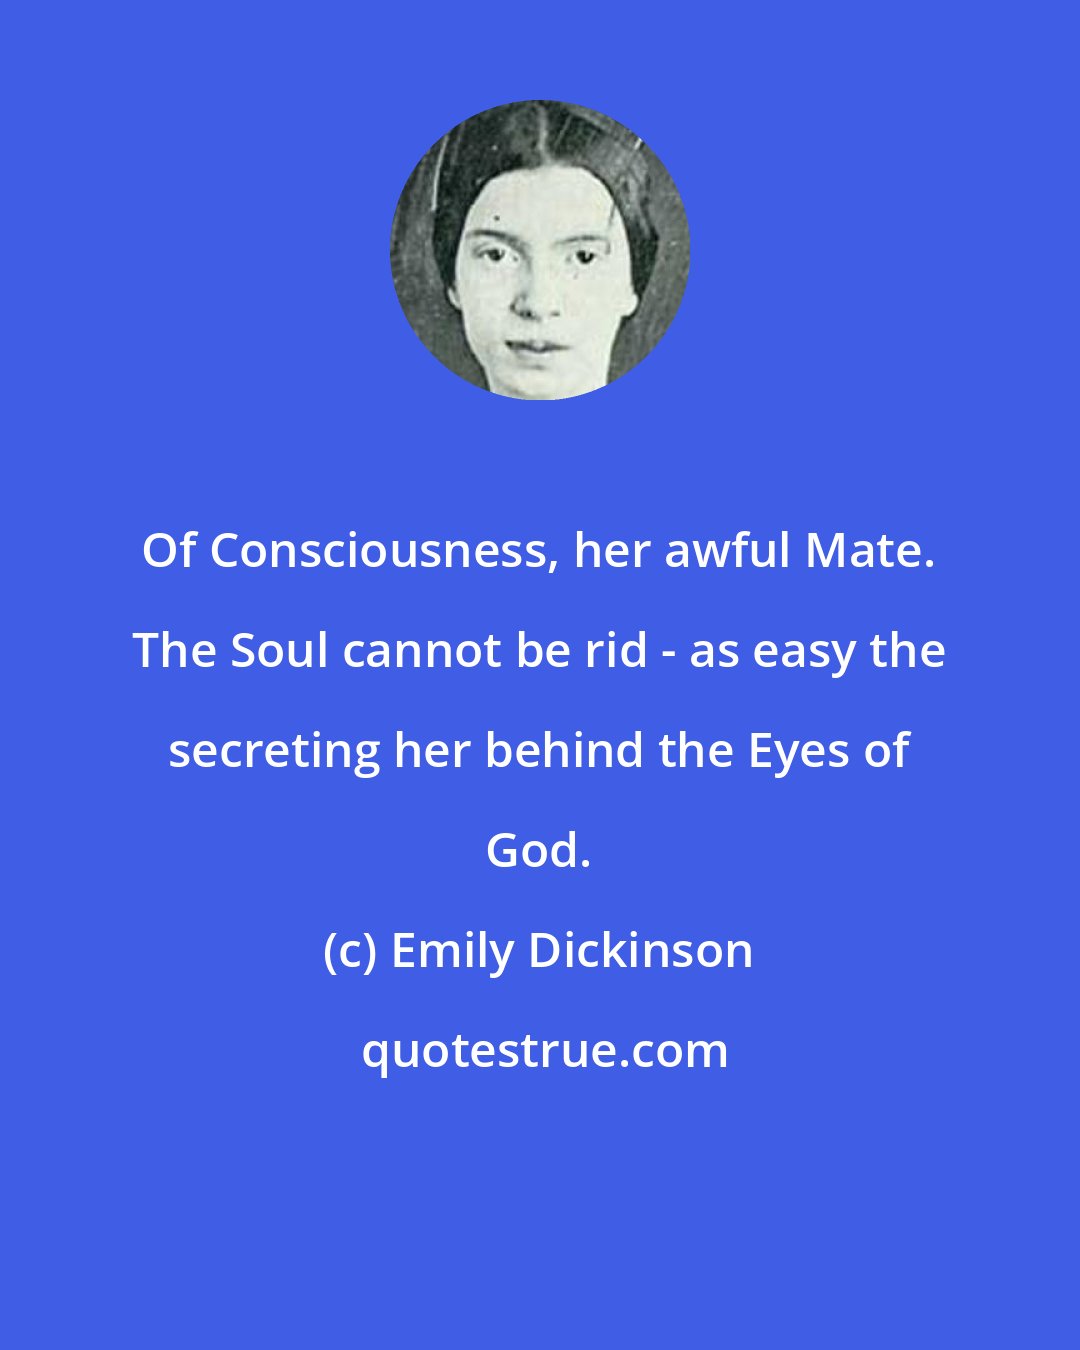 Emily Dickinson: Of Consciousness, her awful Mate. The Soul cannot be rid - as easy the secreting her behind the Eyes of God.